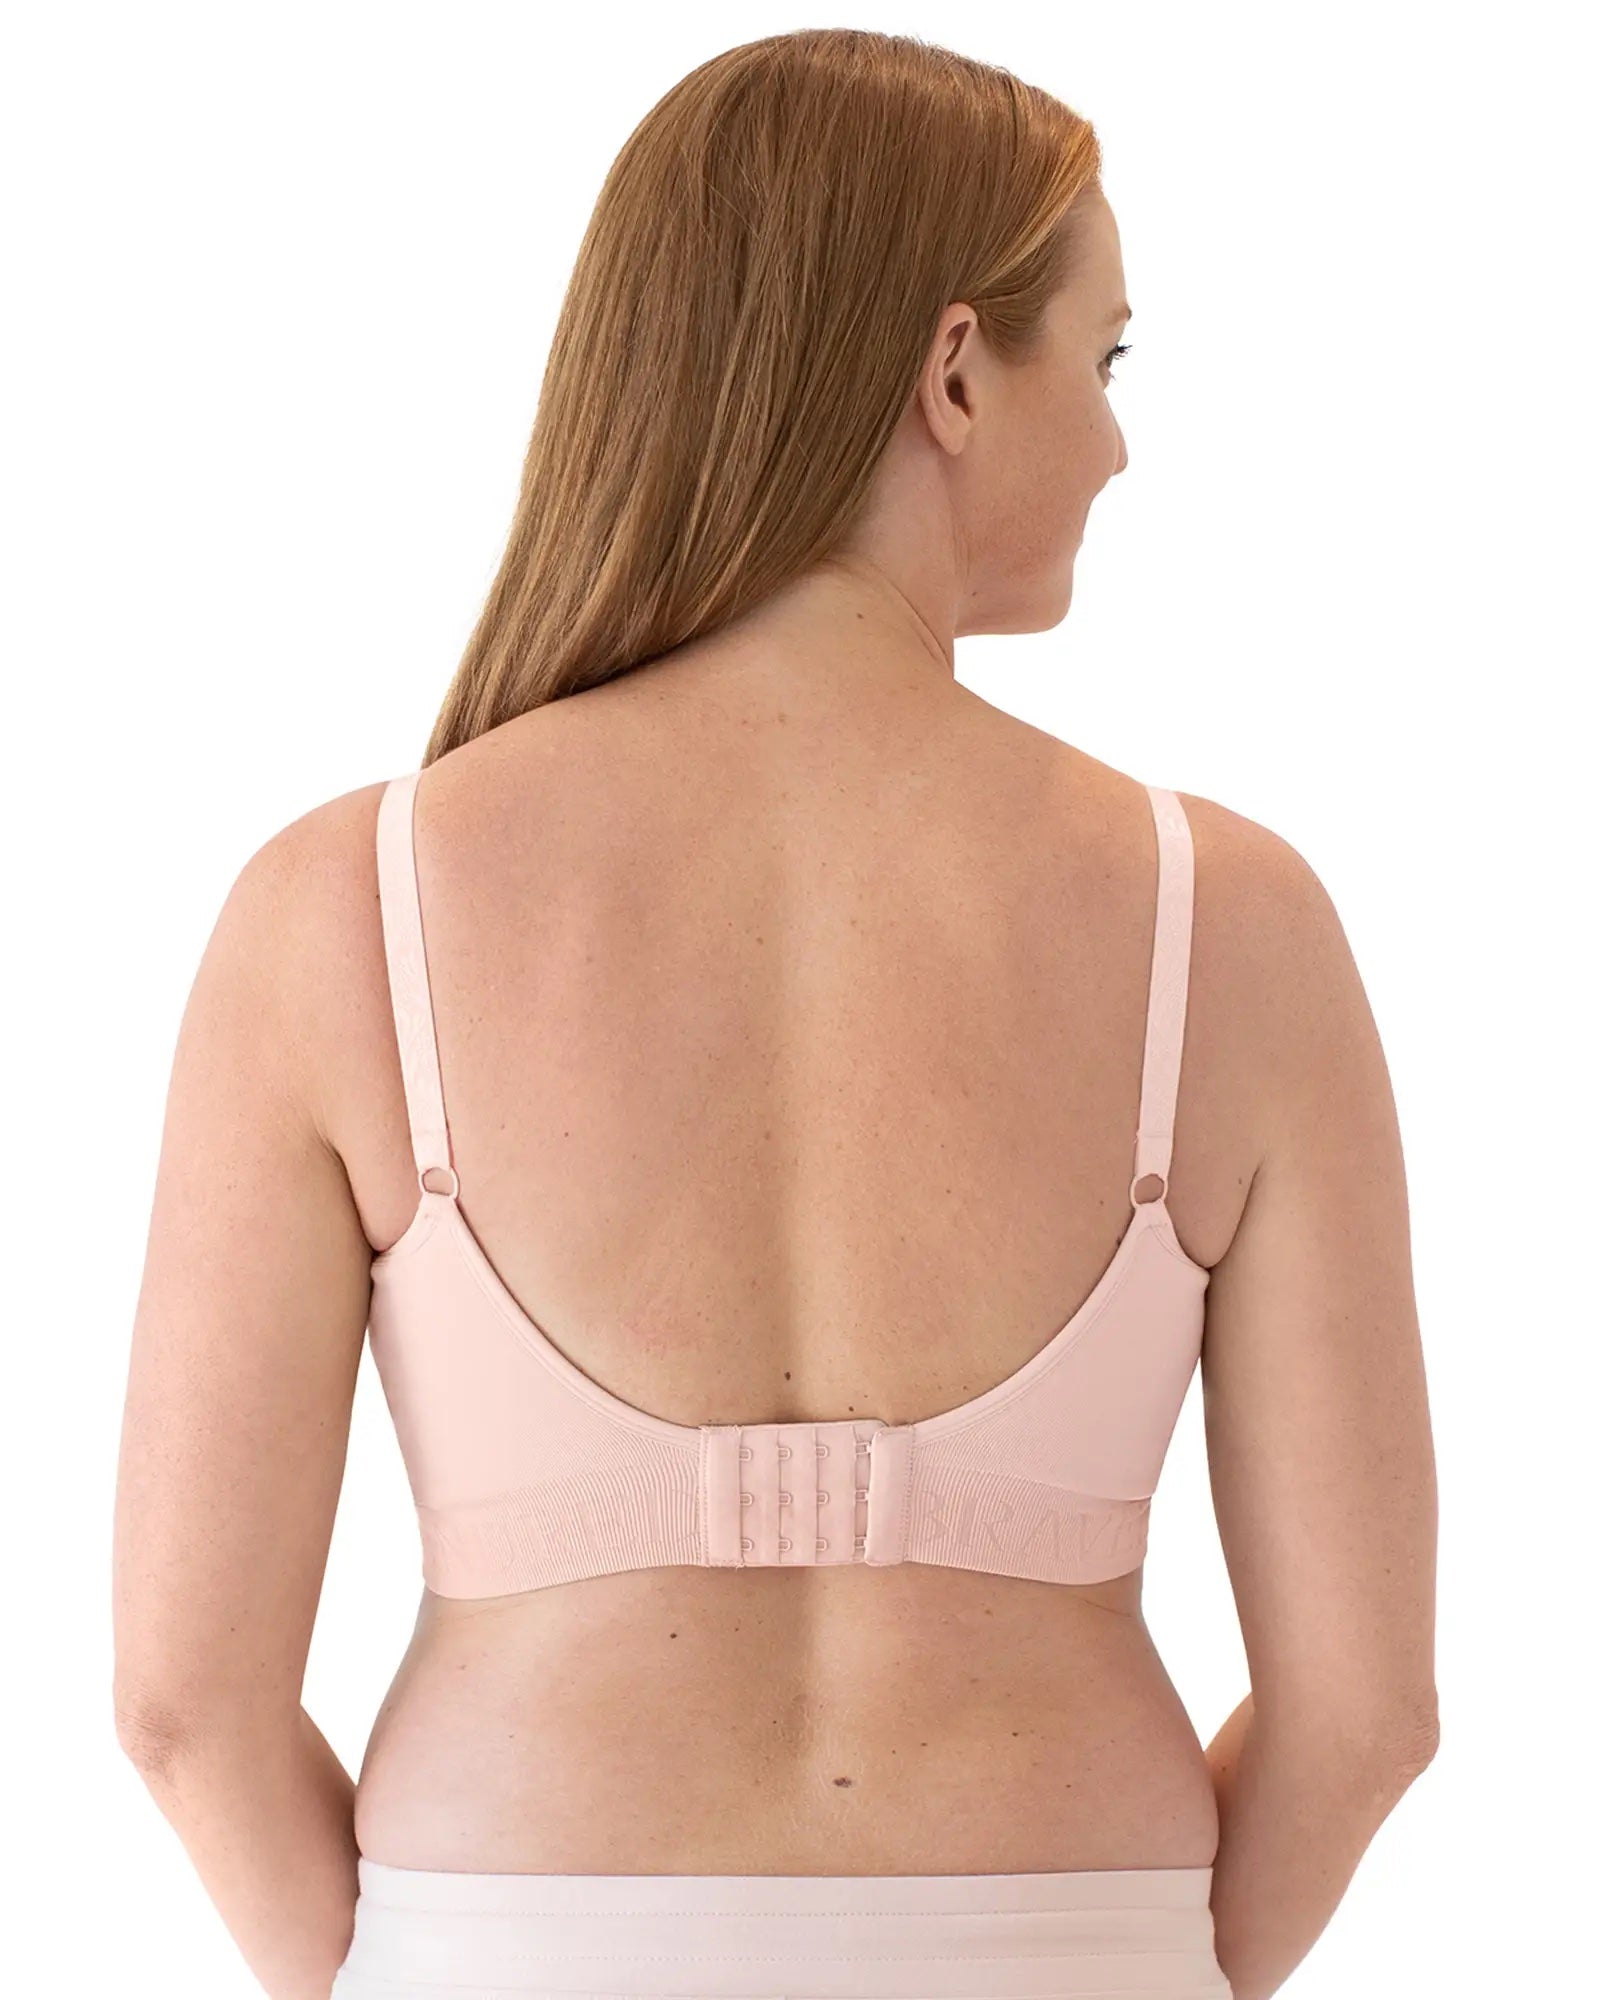 Kindred Bravely Sublime Hands Free Pumping Bra - Beige, Xl-Busty